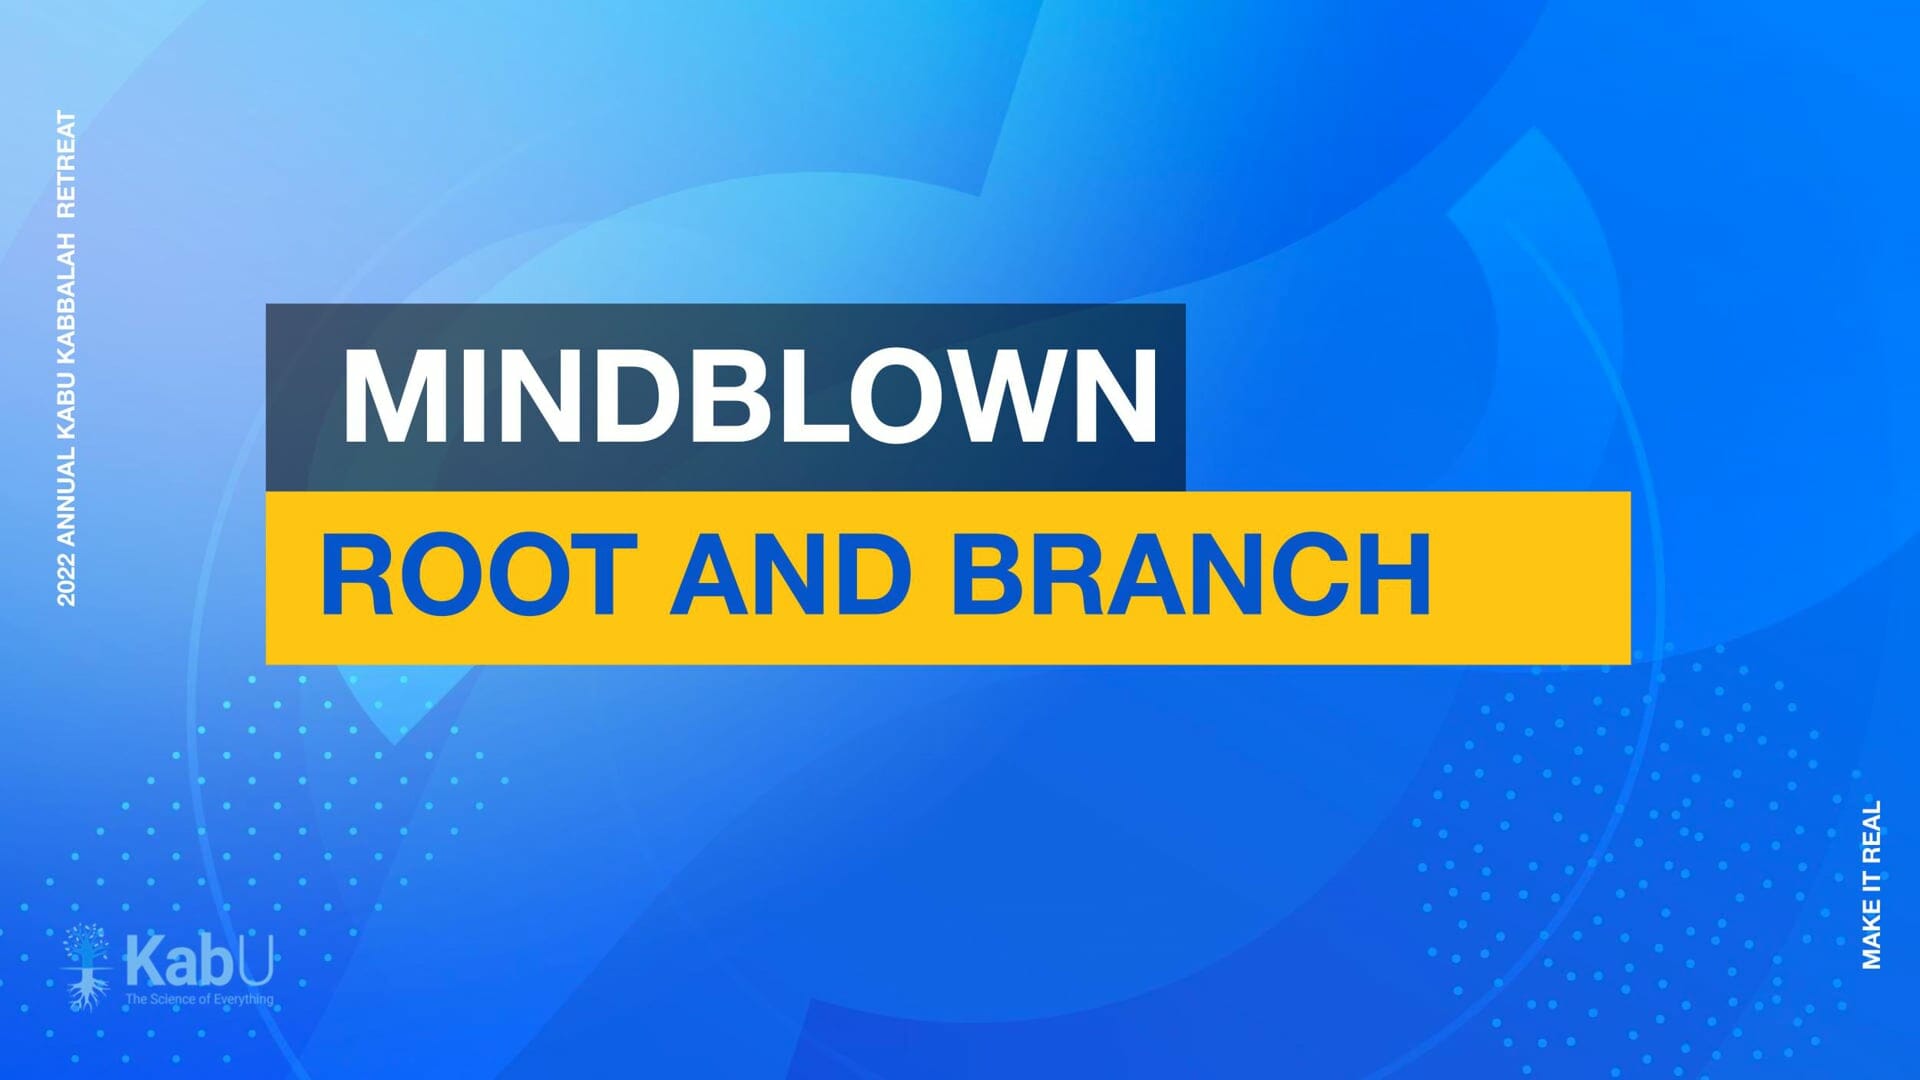 Sept 10, 2022 – Mindblown: Root and Branch